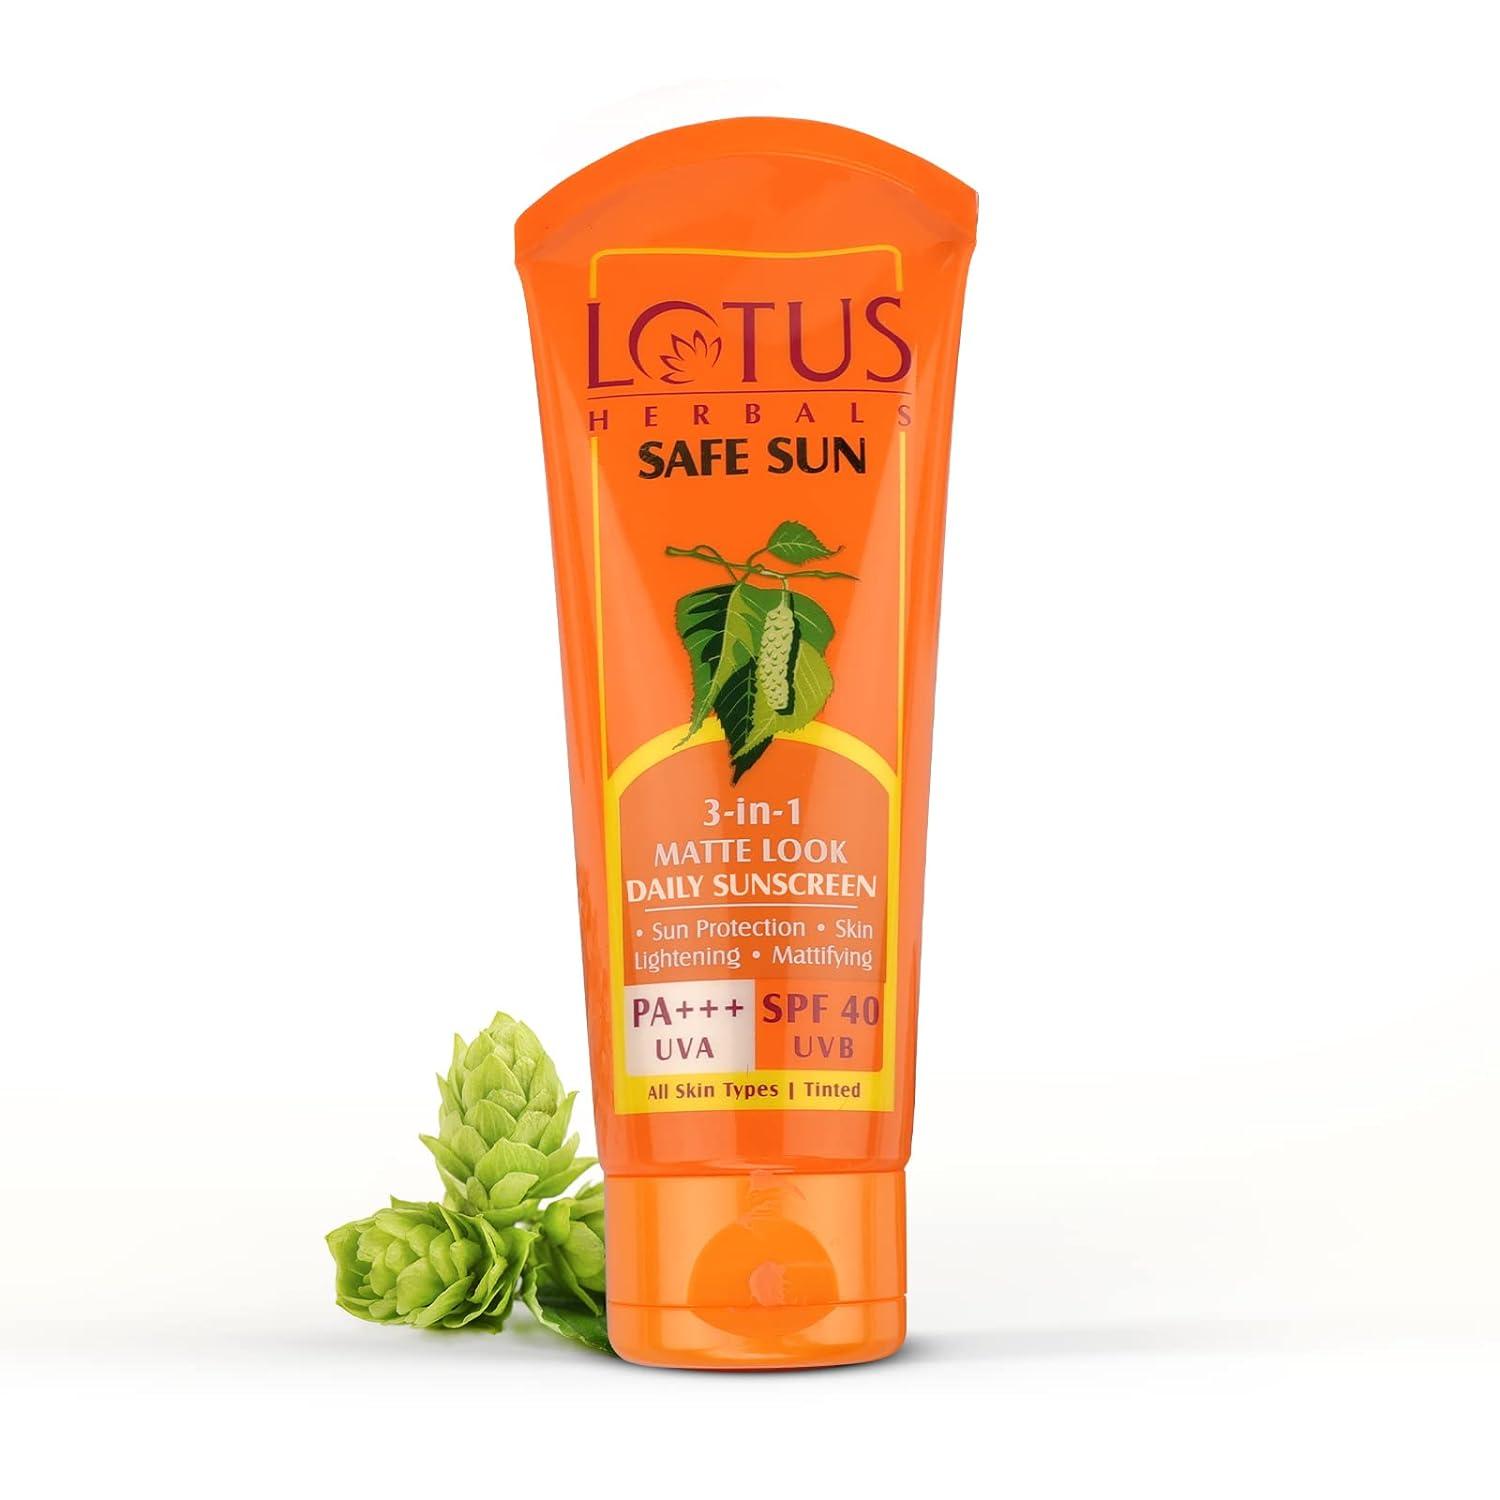 lotus-herbals-safe-sun-3-in-1-matte-look-daily-sunblock-lotion-spf-40-|-100g